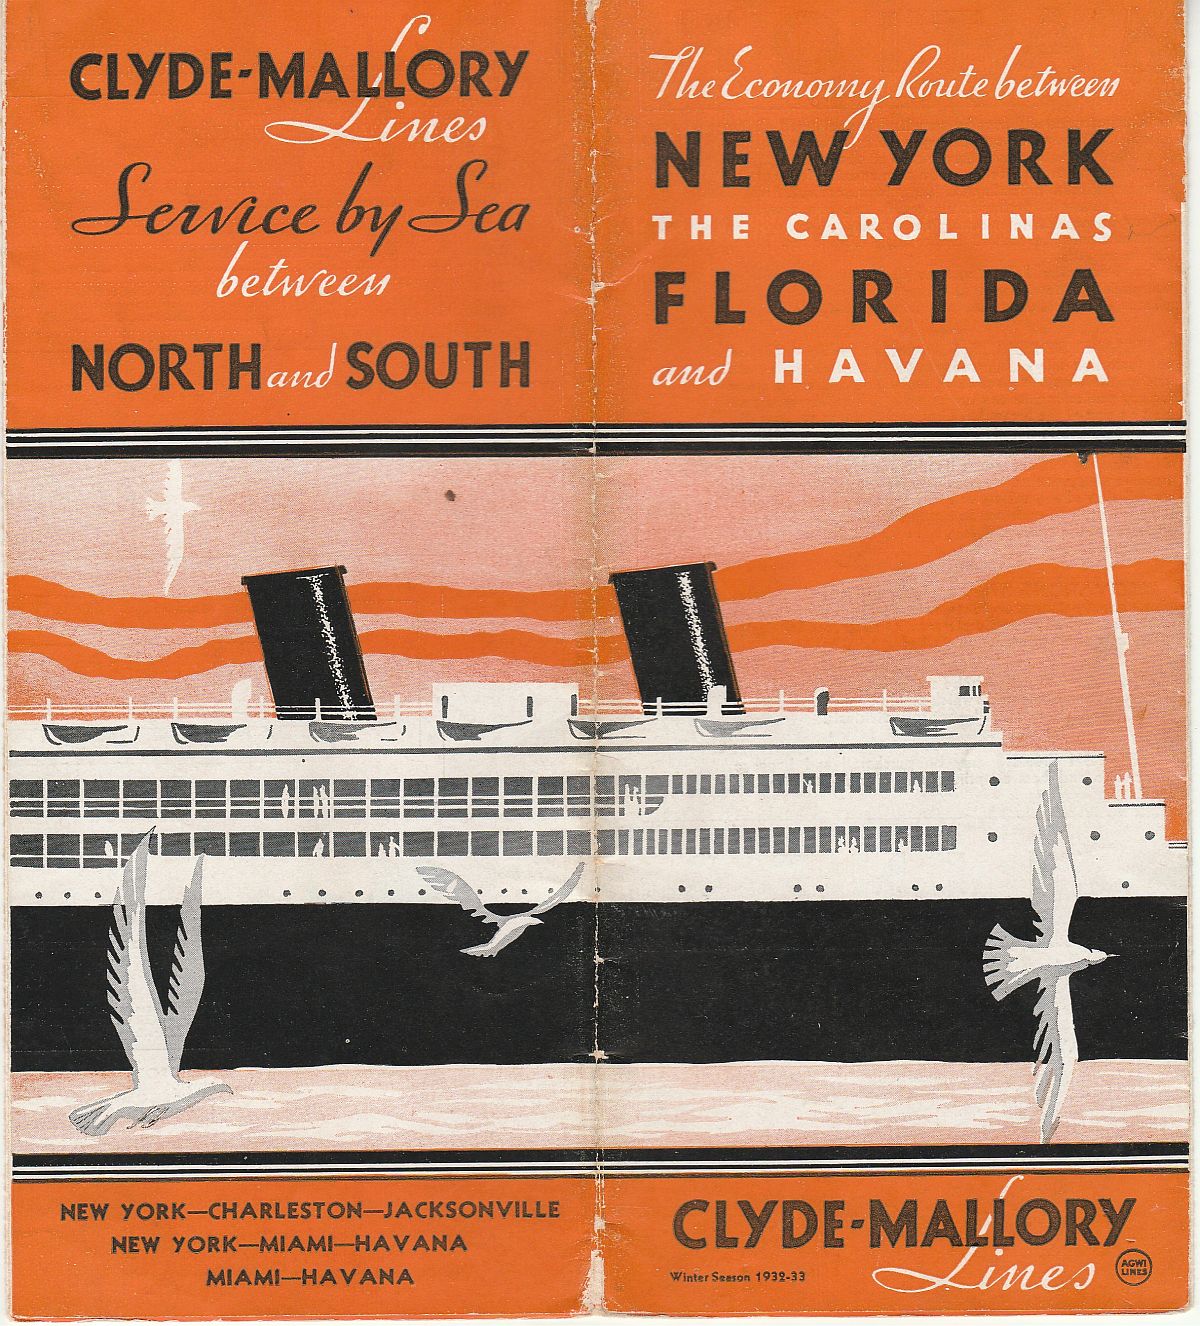 Clyde-Mallory Lines Brochure cover: The economy route between New York, the Carolinas, Florida and Havana